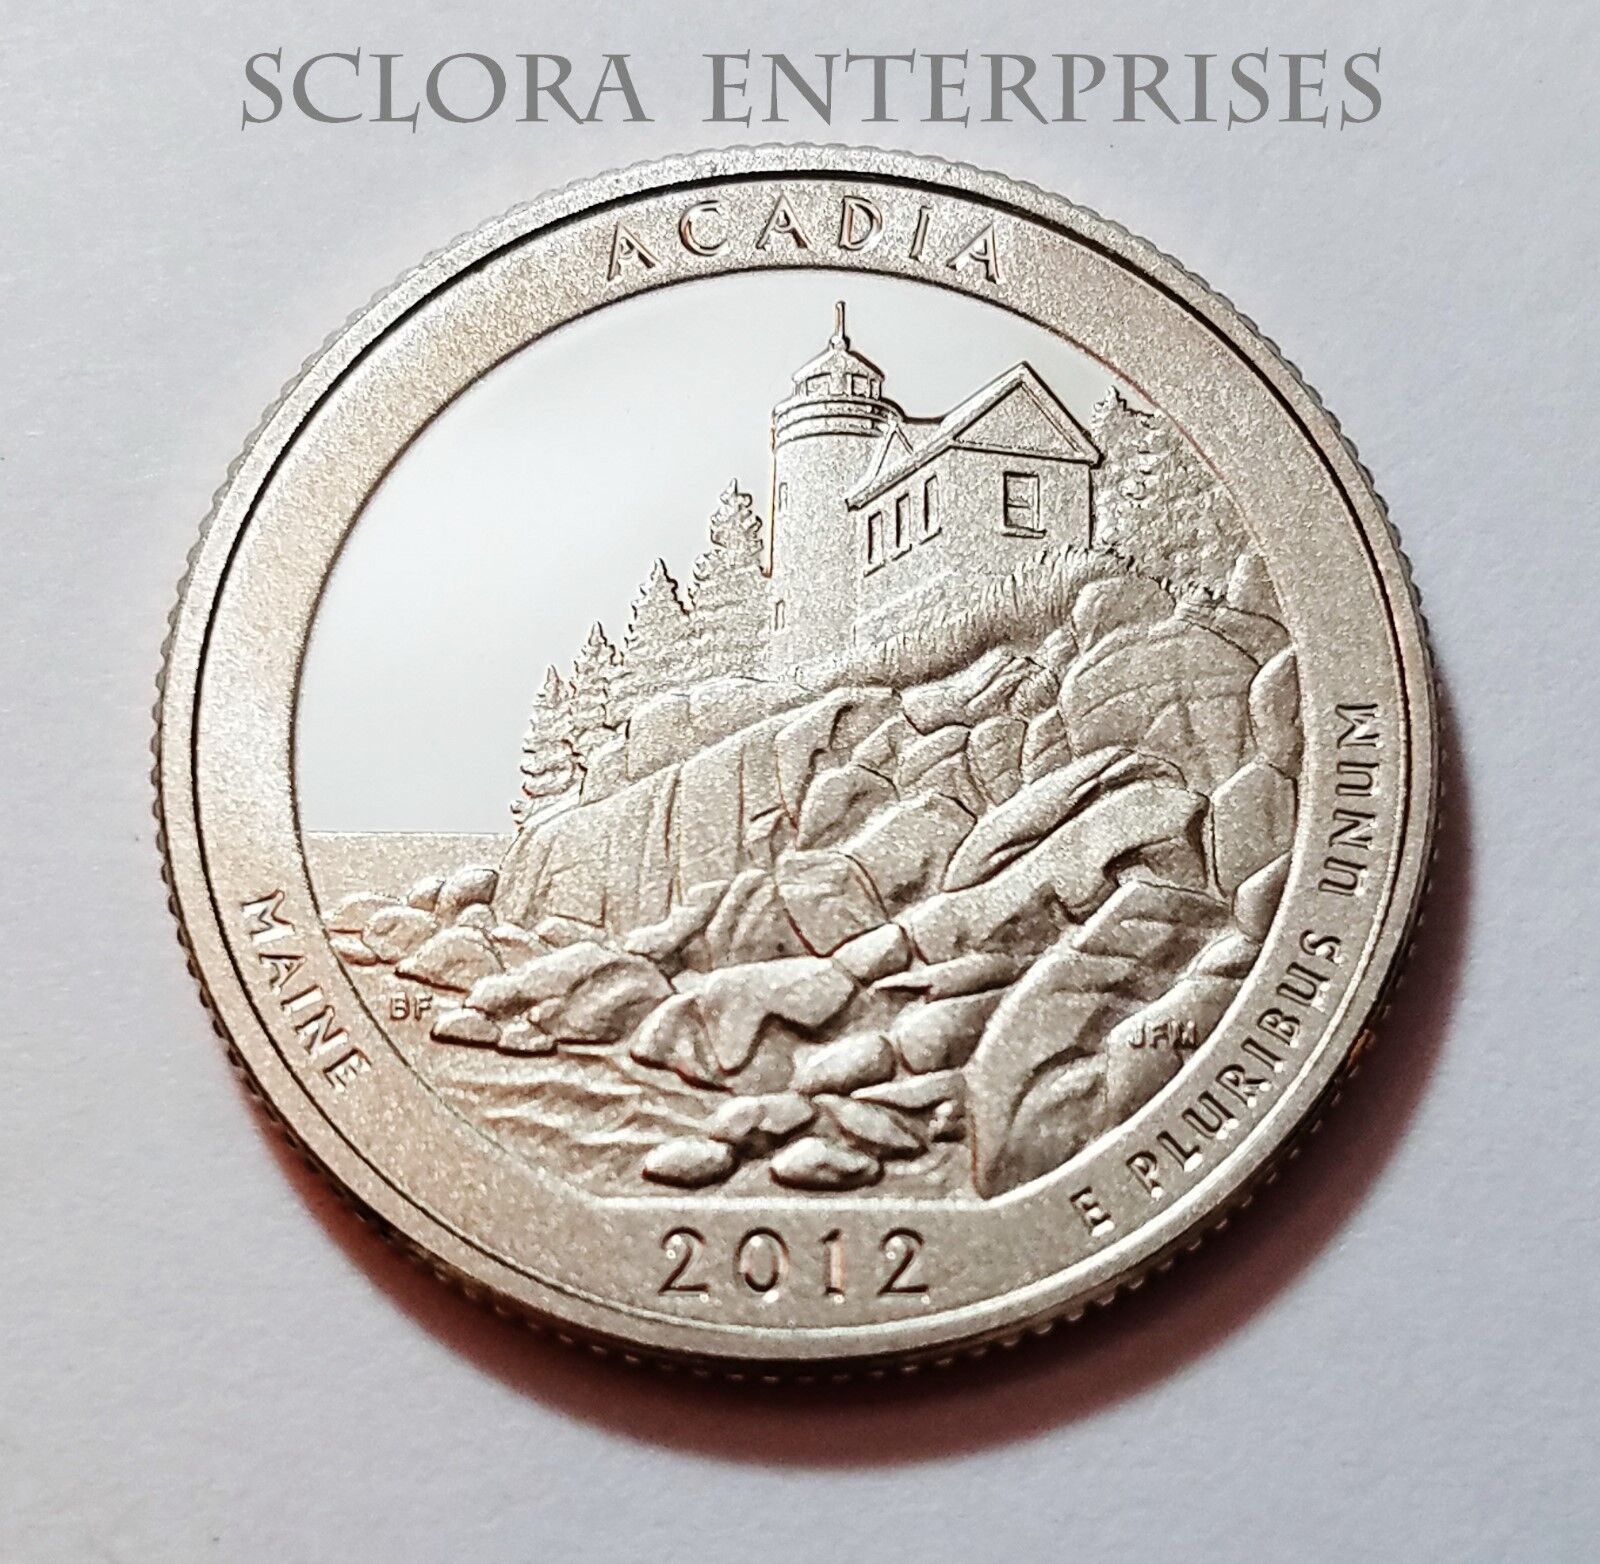 2012 Ranking TOP16 S ACADIA 90% SILVER Inexpensive QUARTER SHIPPING FREE PROOF